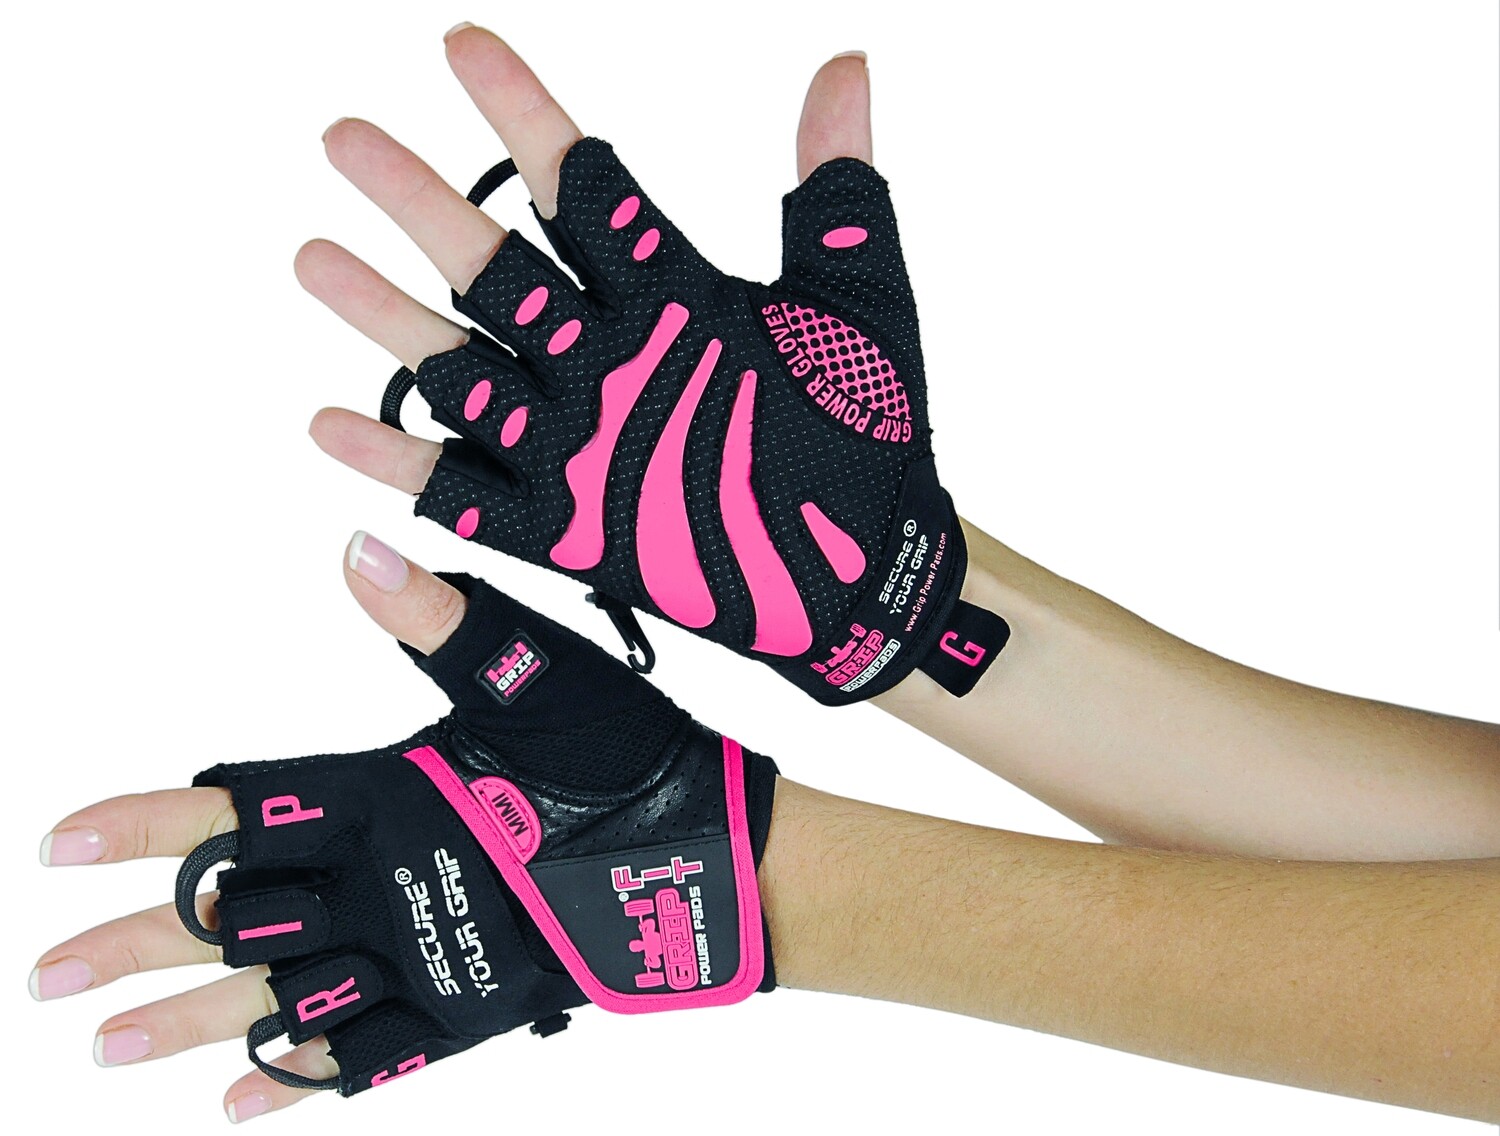 Women Gym Gloves - MIMI - Protect Your Hands & Improve Your Grip - Pink & Black Weightlifting Gloves - Easy to Pull On & Off - Adjustable Fit